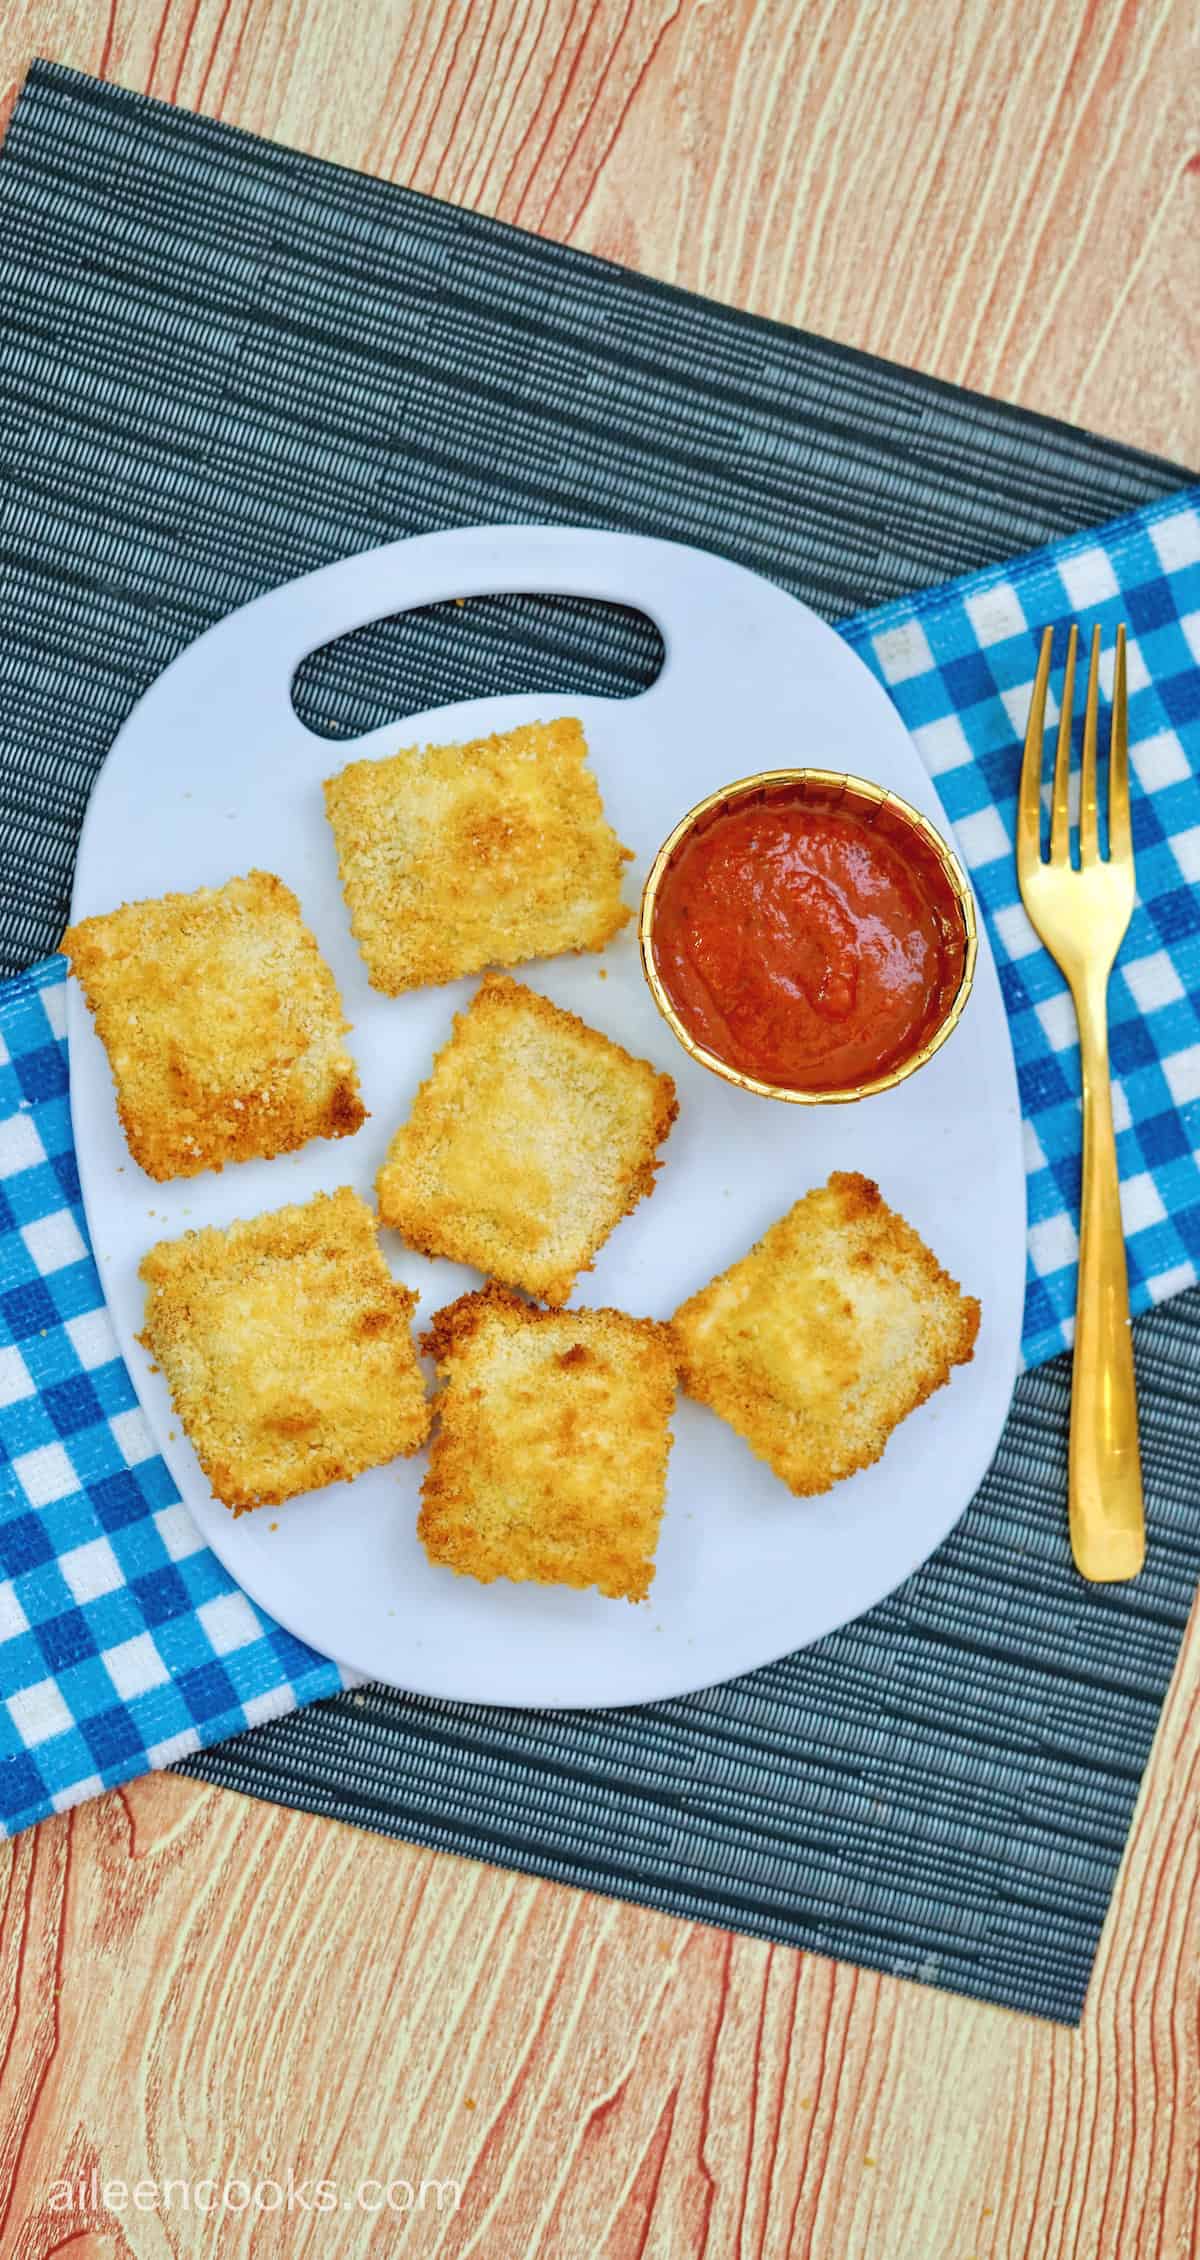 A white platter filled with golden brown air fried ravioli next to a small bowl of marinara sauce.